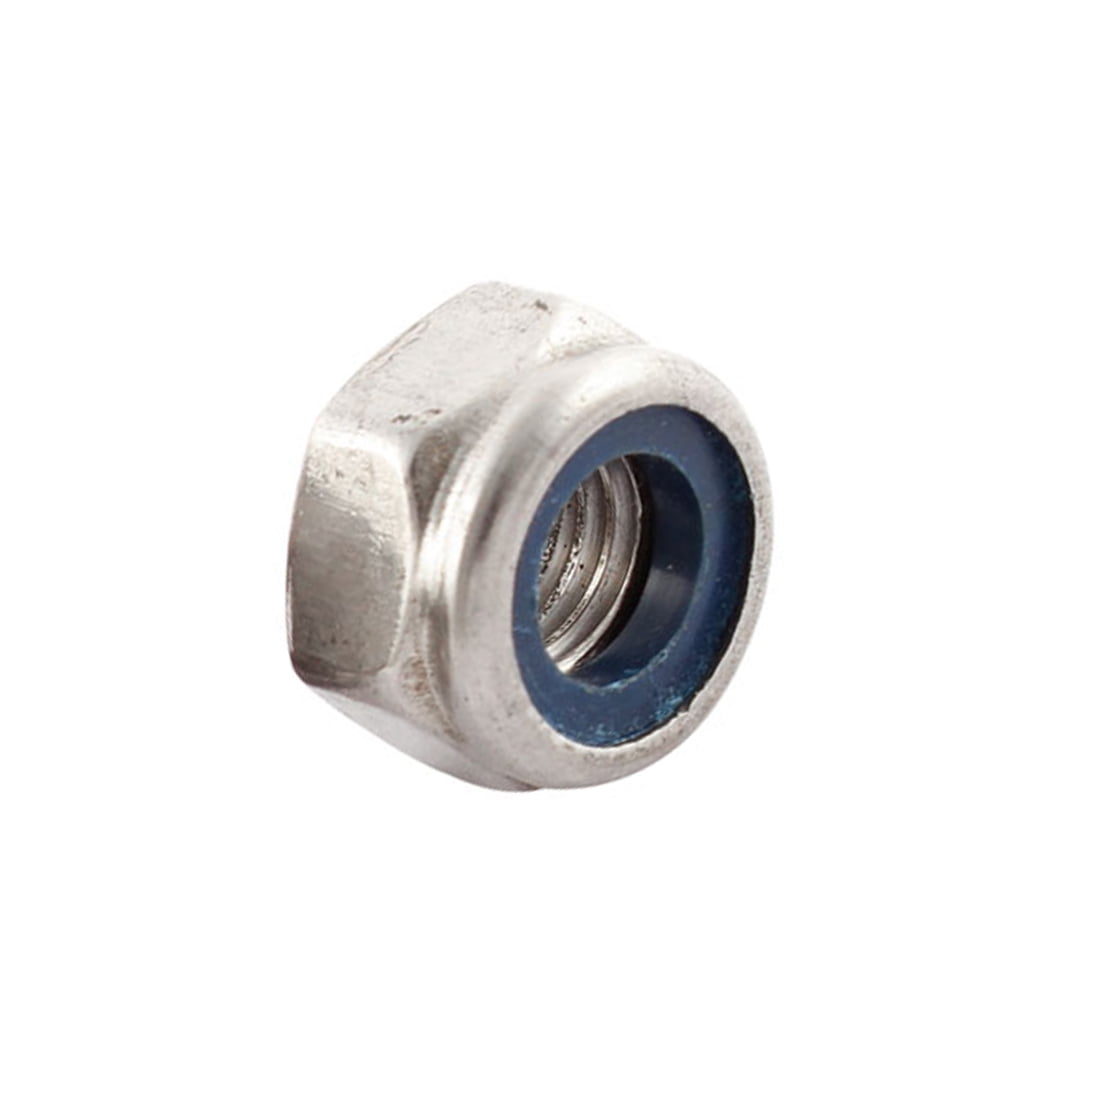 METRIC HEX NUT MARINE GRADE  A4-80  316 STAINLESS   M6-1P   PKG OF 25  A4 